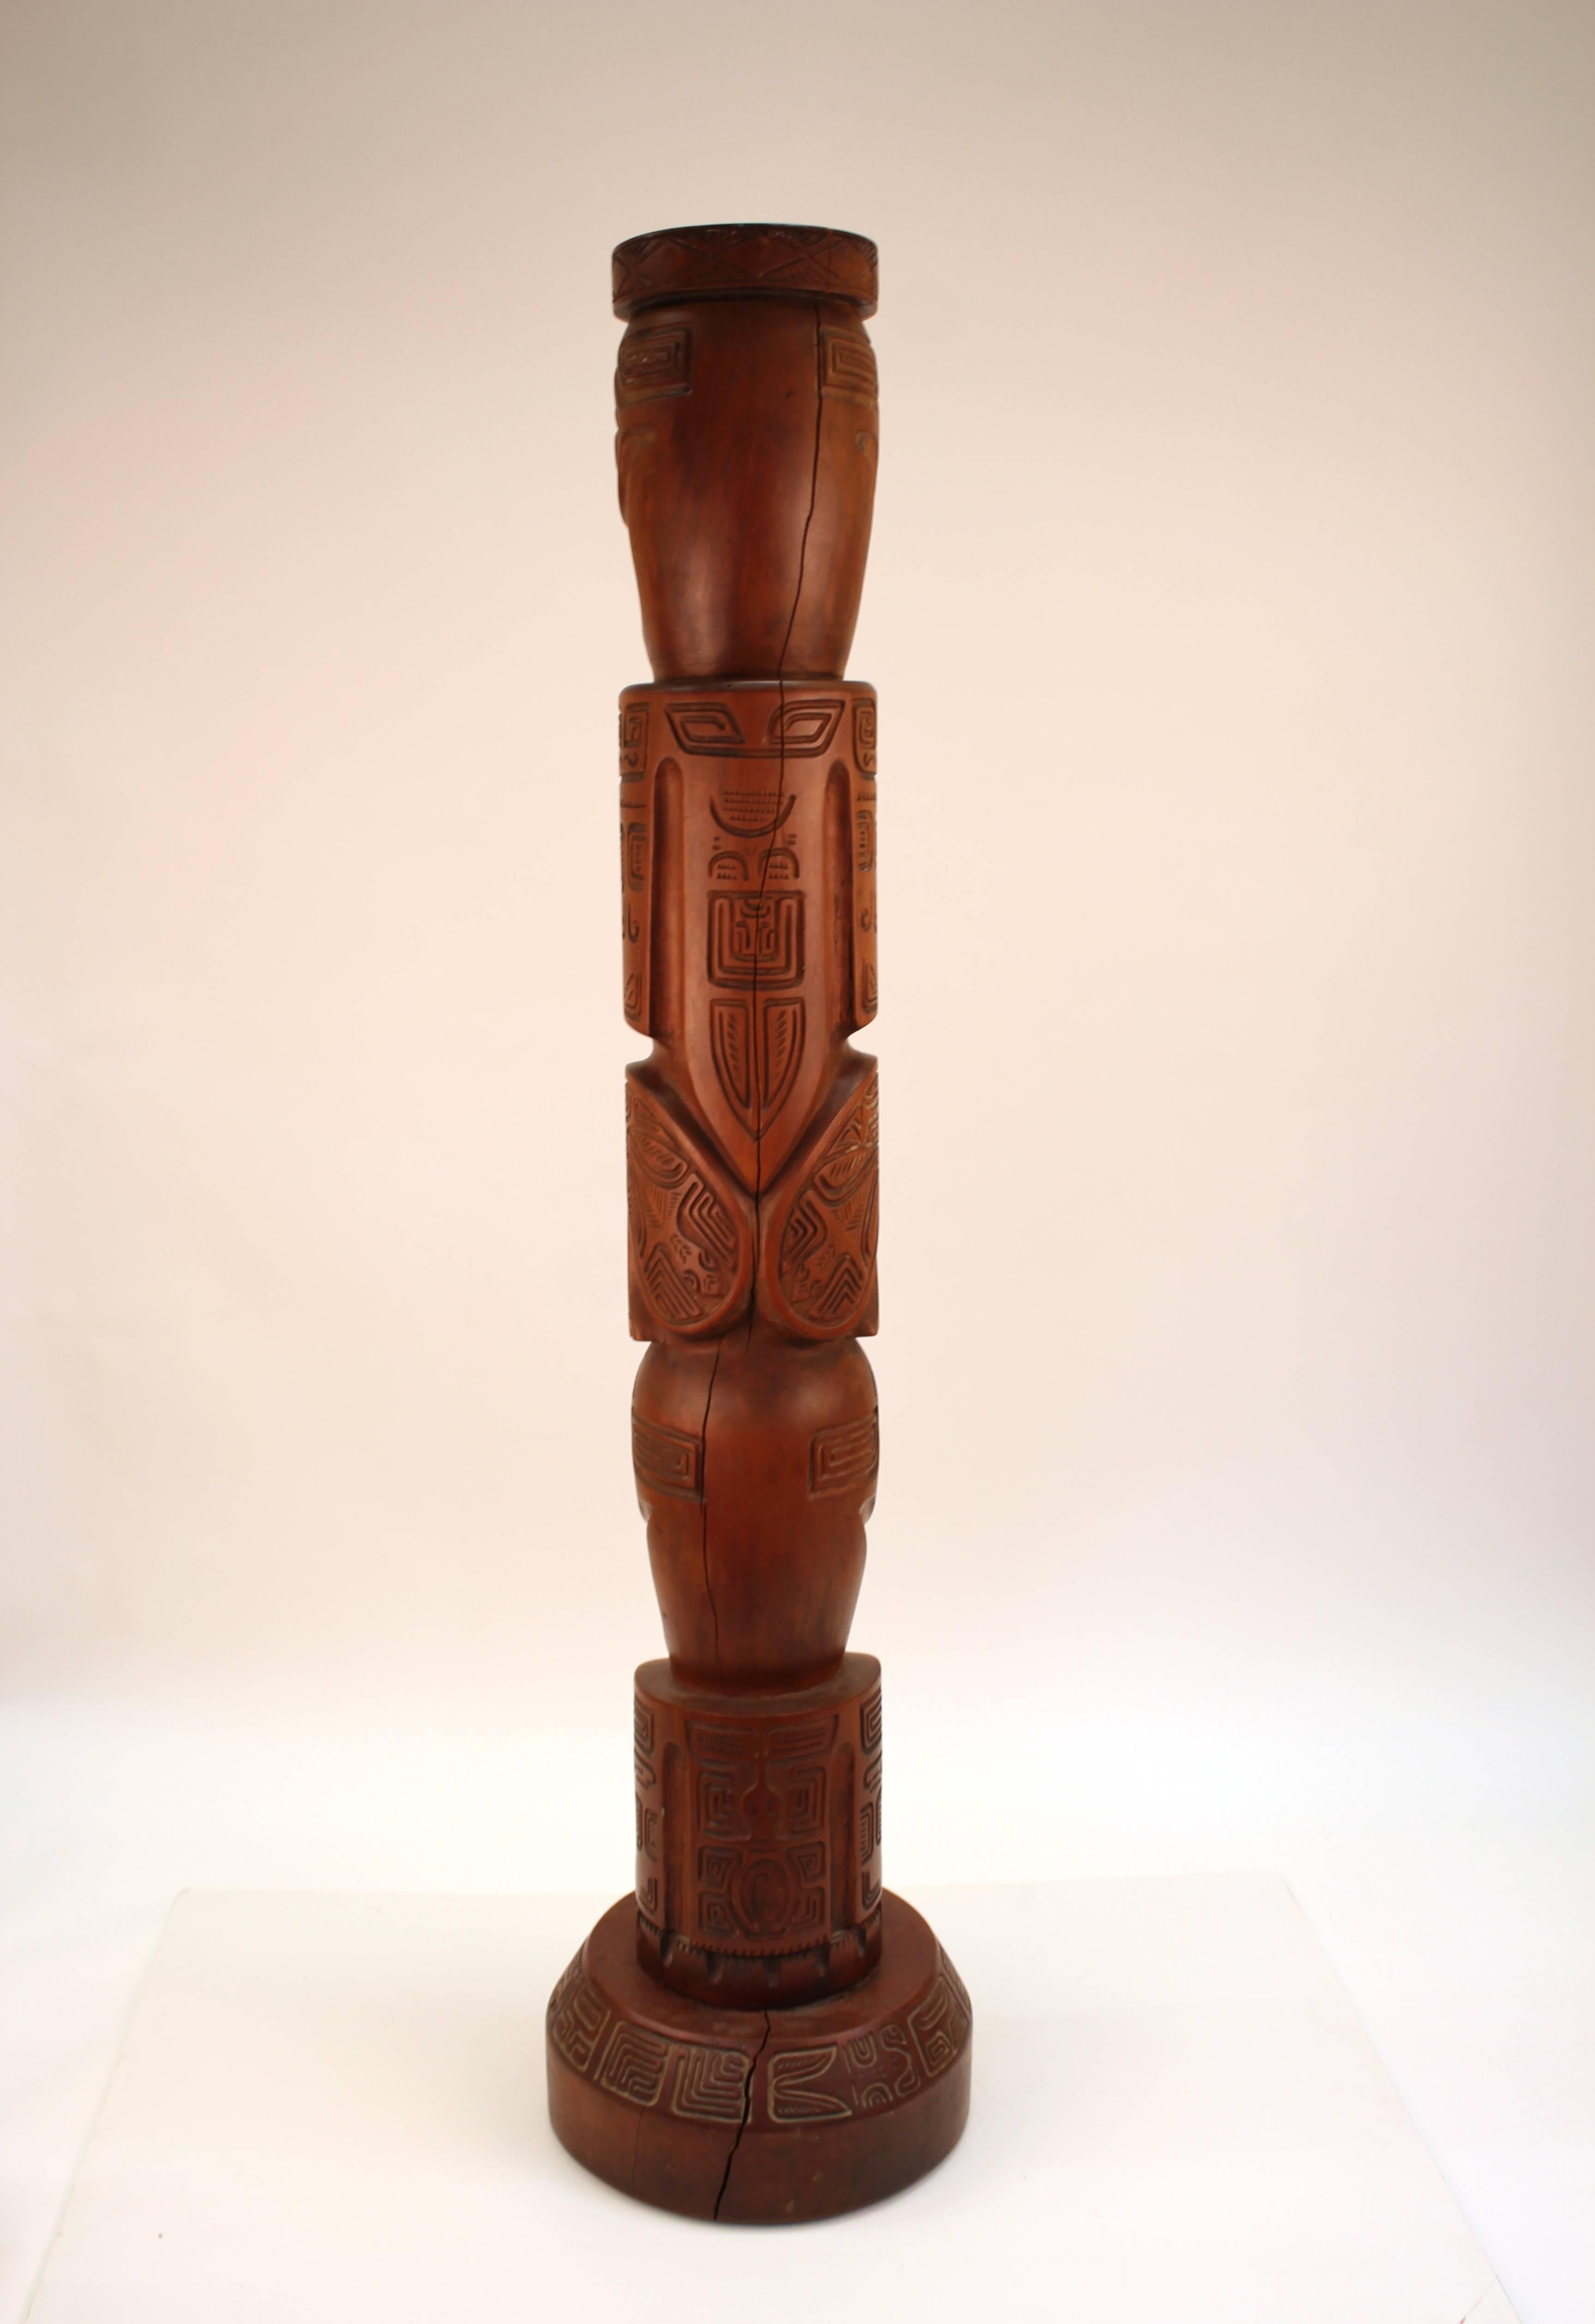 carved wooden human figure